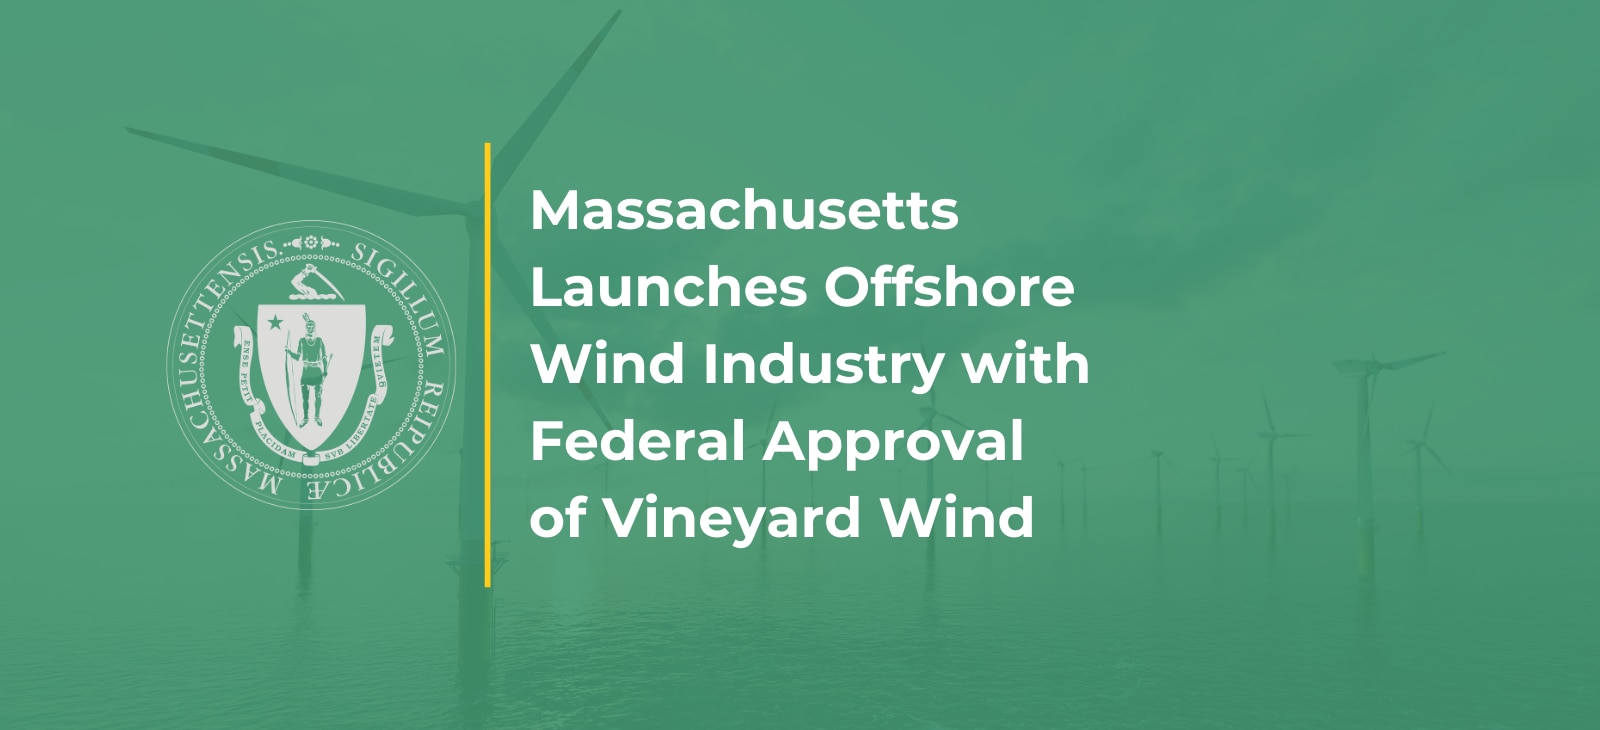 Baker-Polito Administration Applauds Federal Approval of Vineyard Wind Project